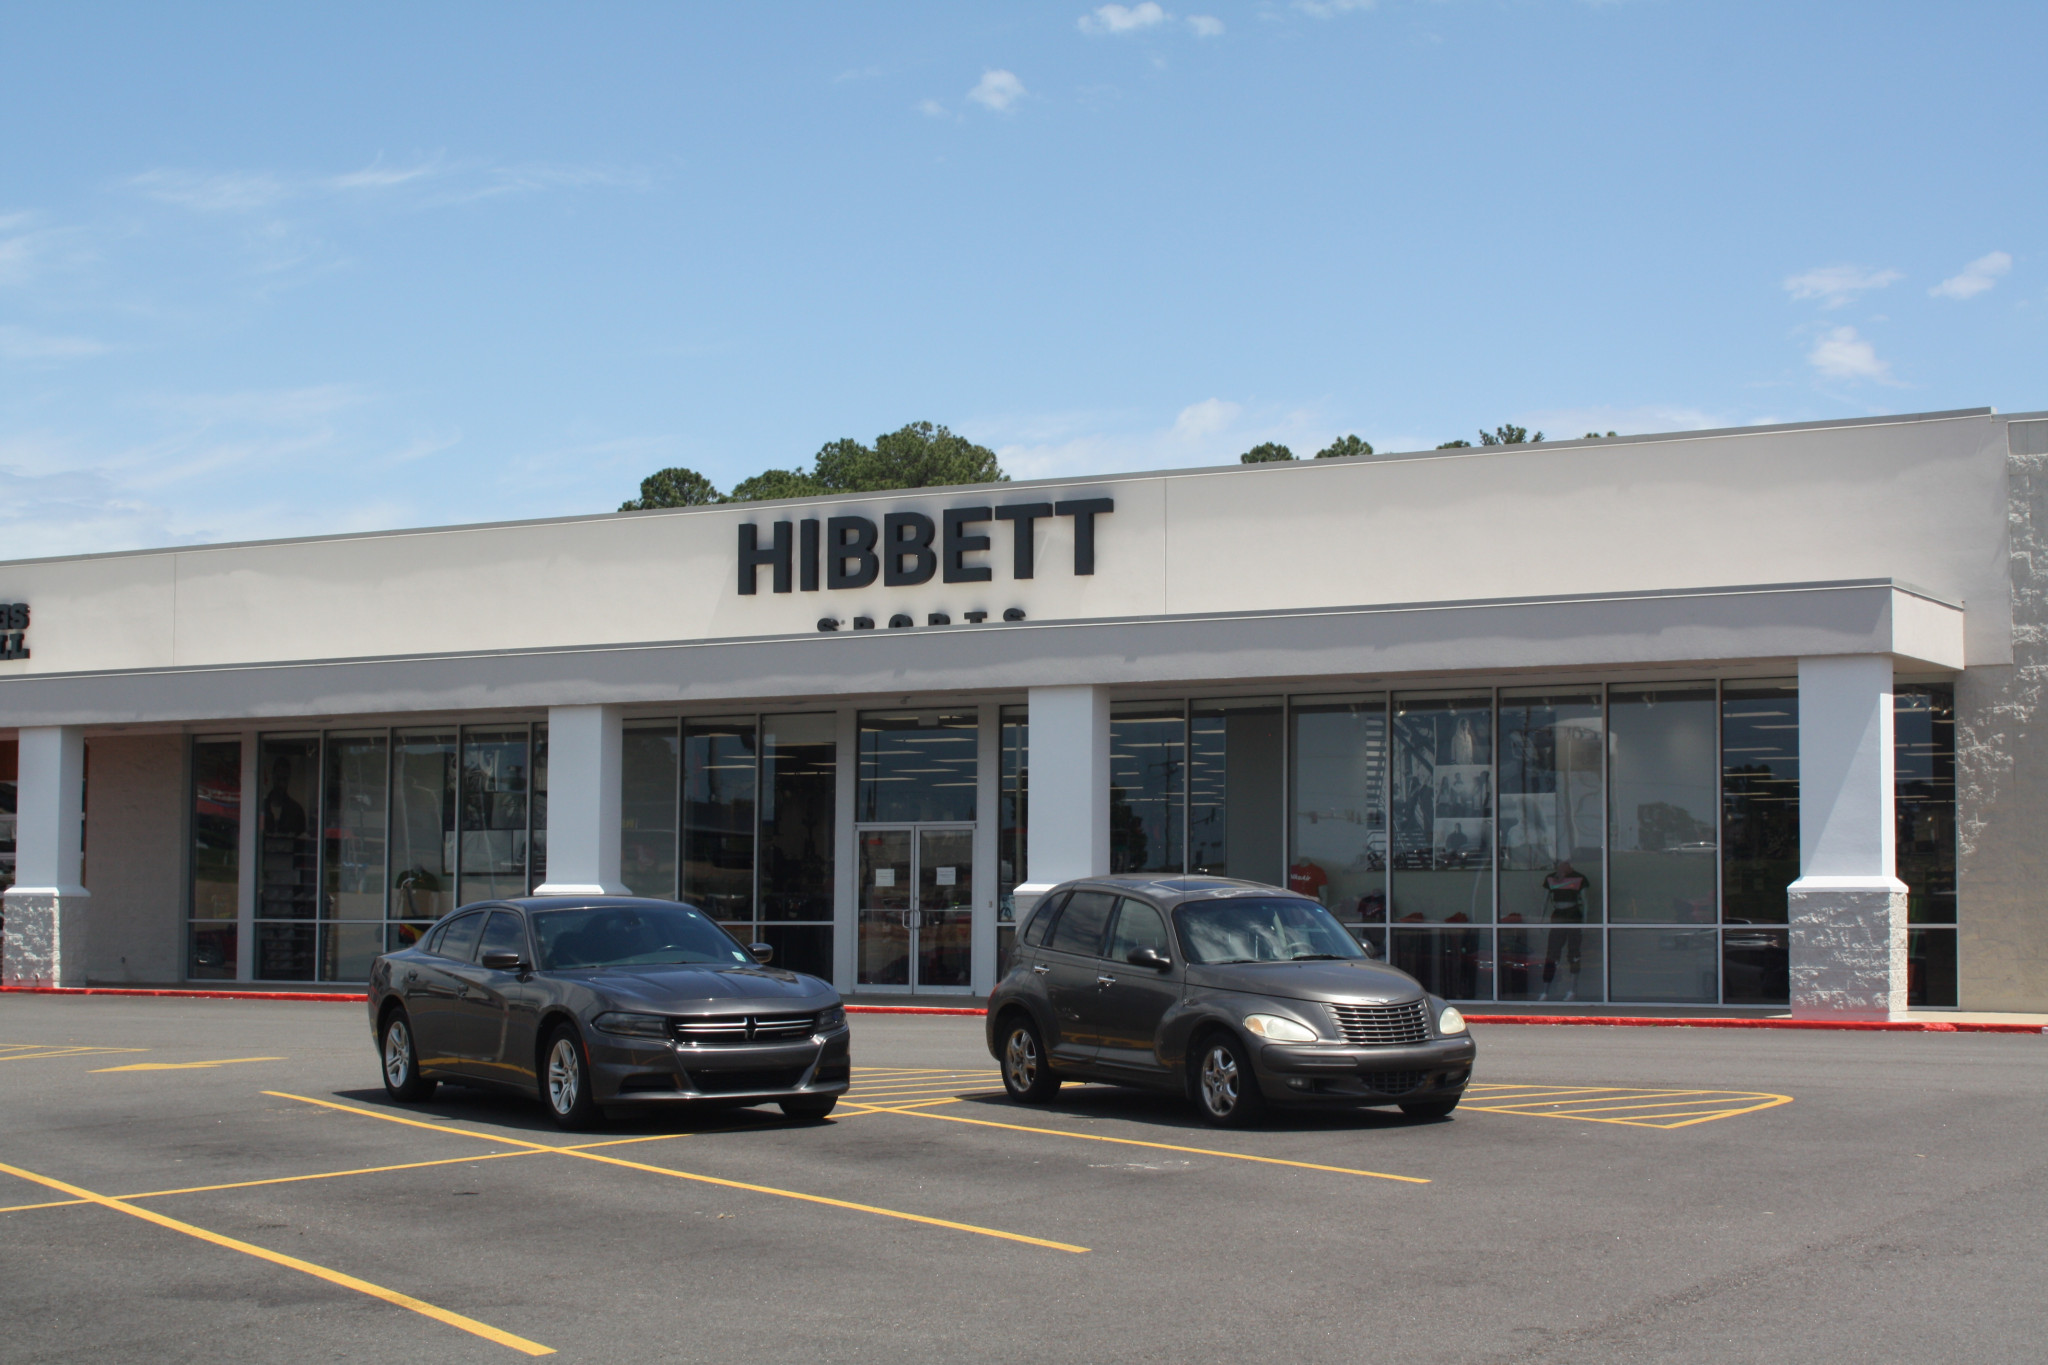 Now Hibbett Sports stands rebuilt with new signage, though the store is currently closed due to the coronavirus pandemic.